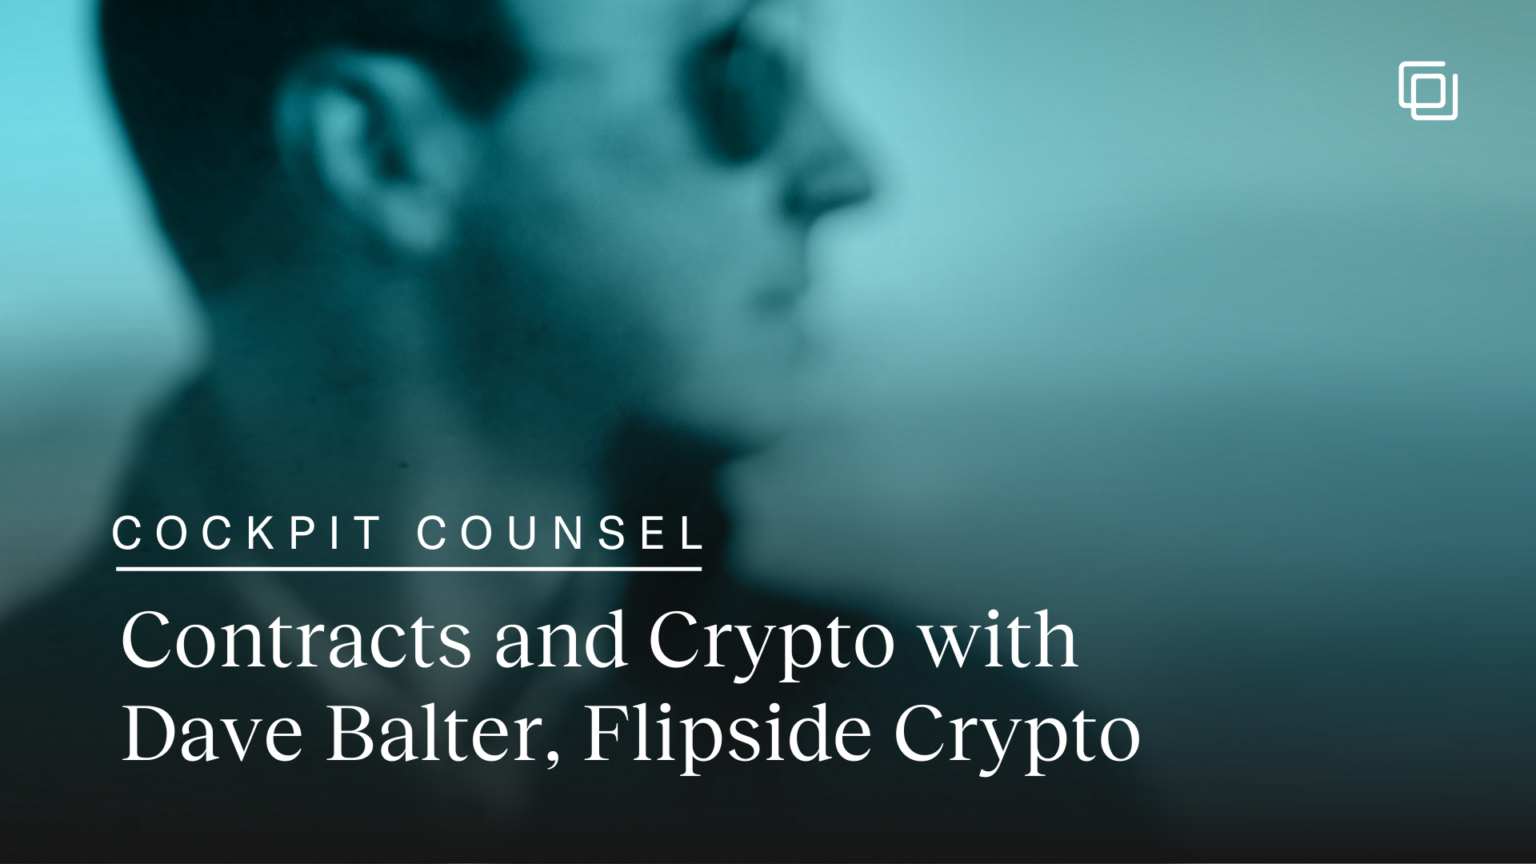 Cockpit Counsel: Contracts and Crypto with Dave Balter, Flipside Crypto